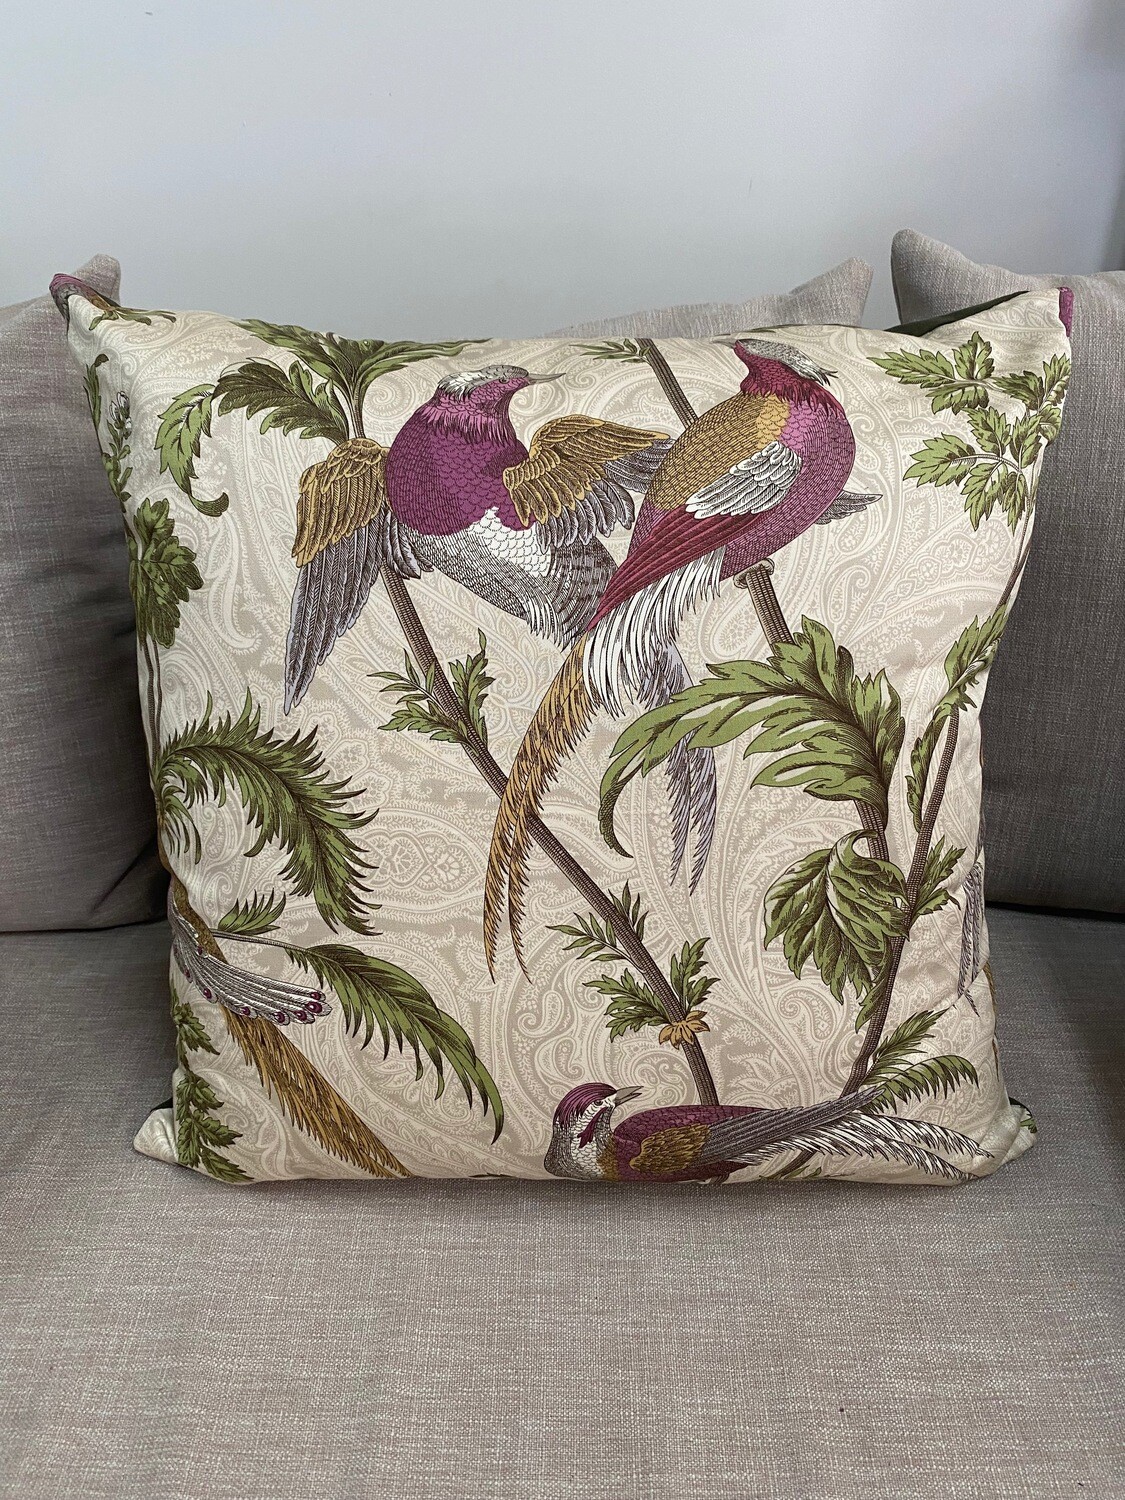 Large scatter cushion with bird print